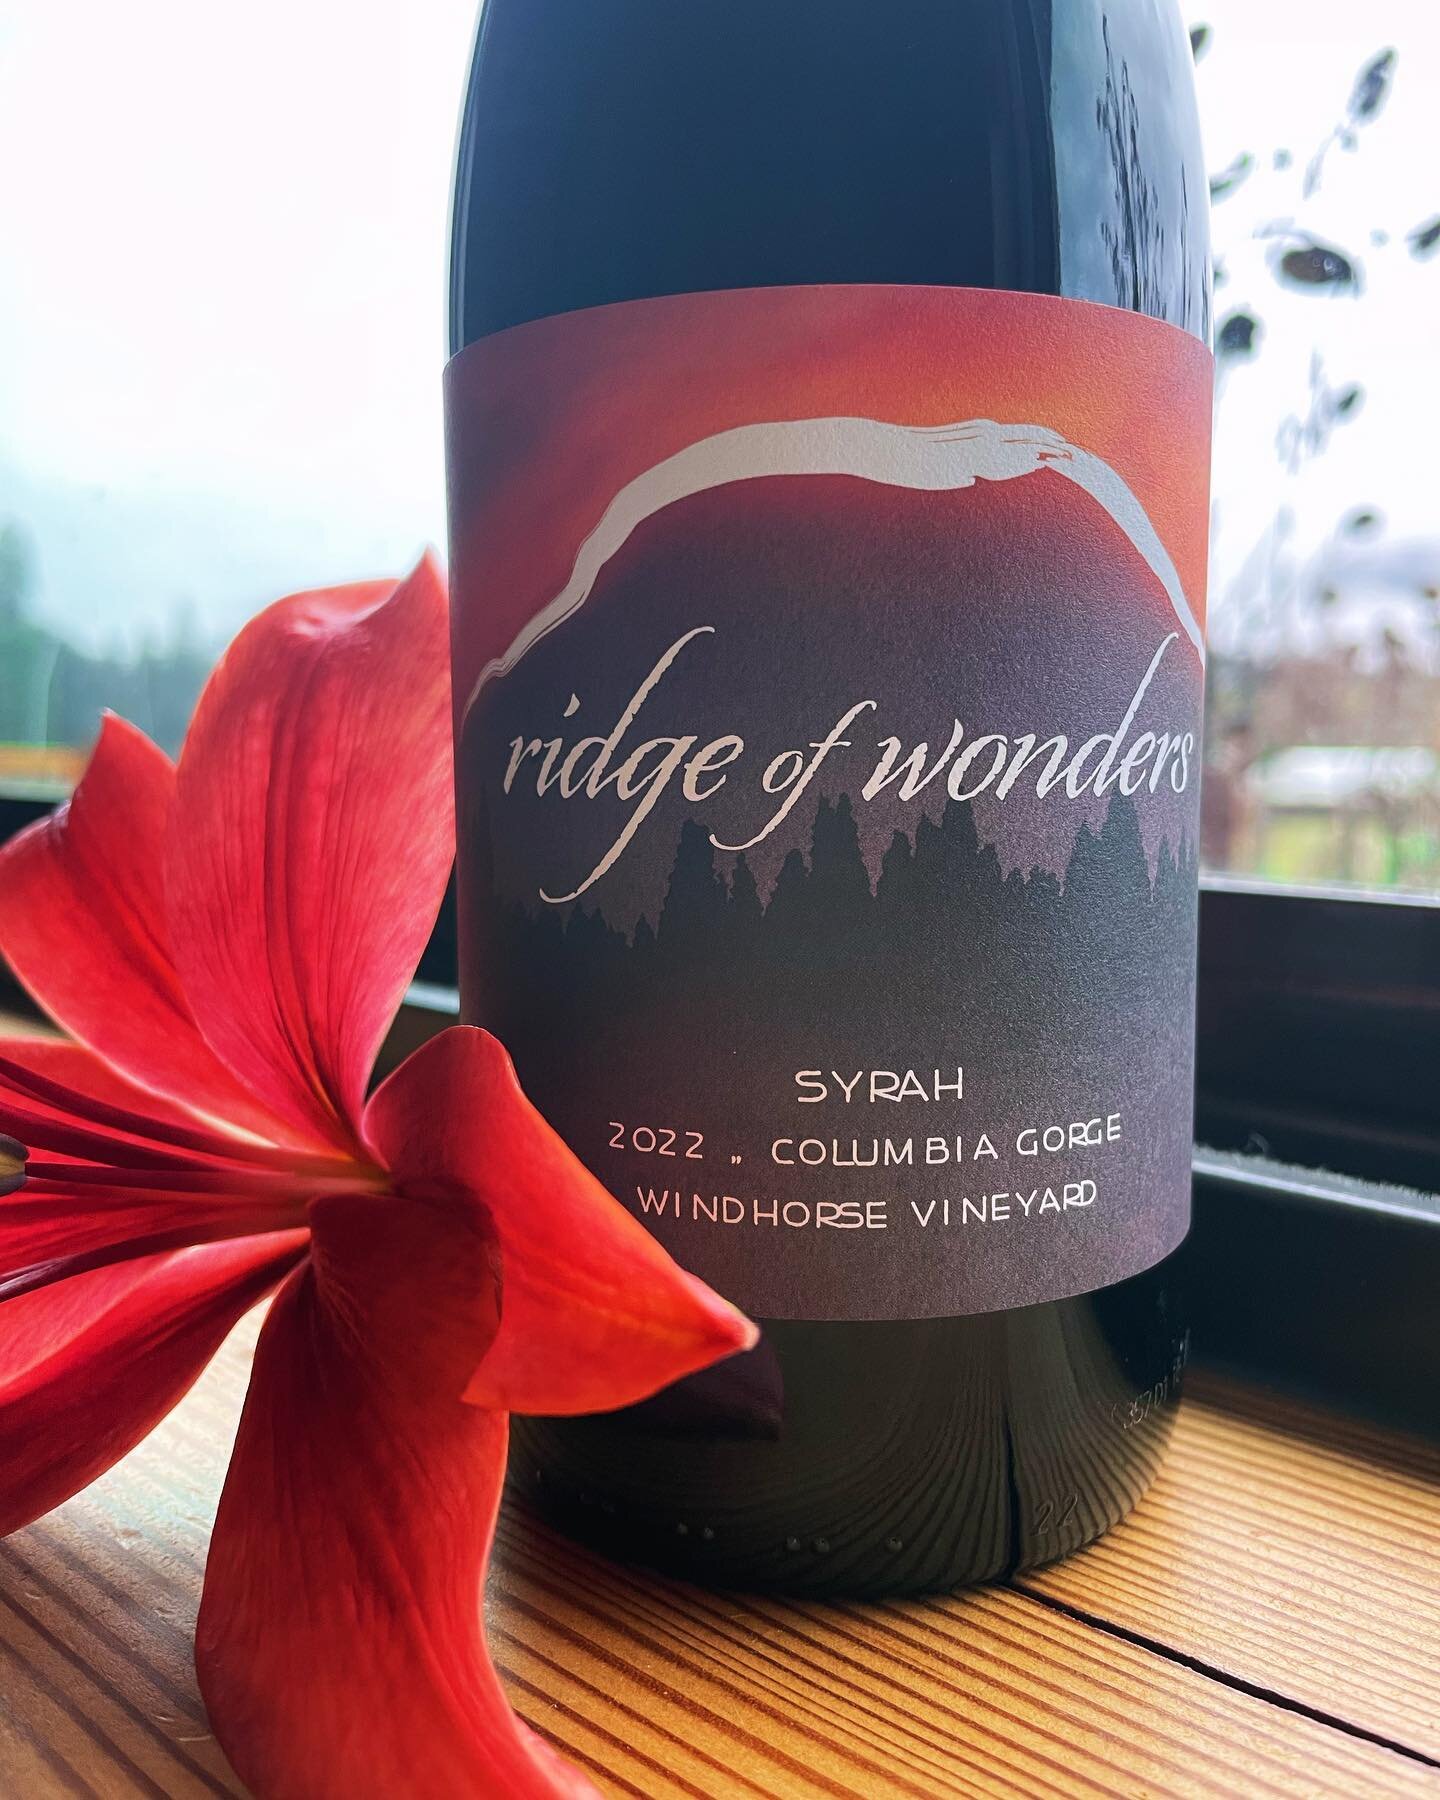 Tuesday, 12/12 at Riverside Restaurant in Hood River! 
2 for 1 Pasta night!
1/2 price on bottles of wine!
Come enjoy a glass of the new Syrah from Windhorse Vineyard with me&hellip;
#womeninwine #womeninwinemaking #highelevationvineyards #syrah #gorg